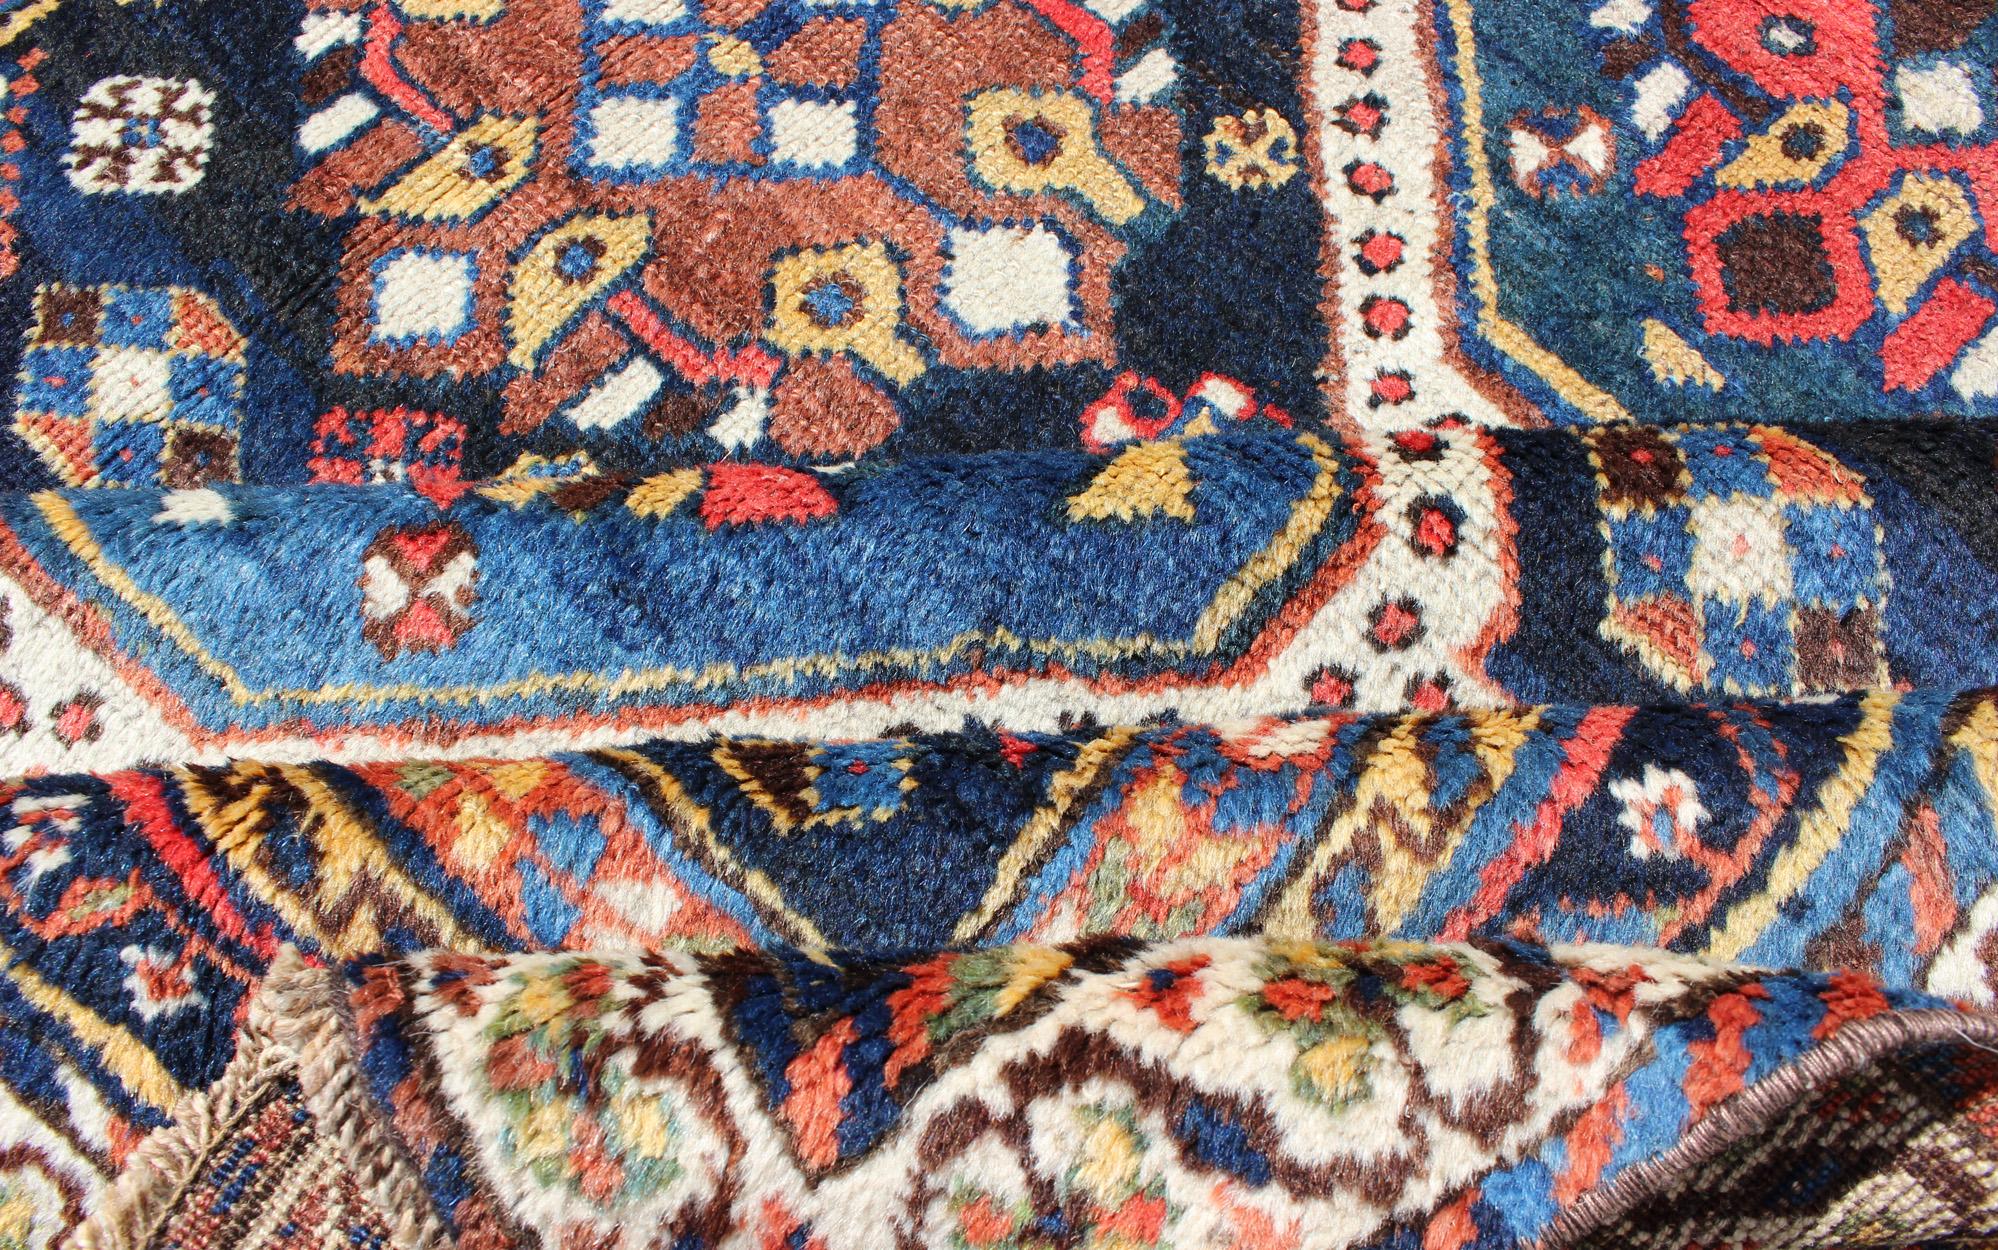 Antique Persian Qashqai Rug with Four-Medallion Design in Blue, Red, Brown Tones In Good Condition For Sale In Atlanta, GA